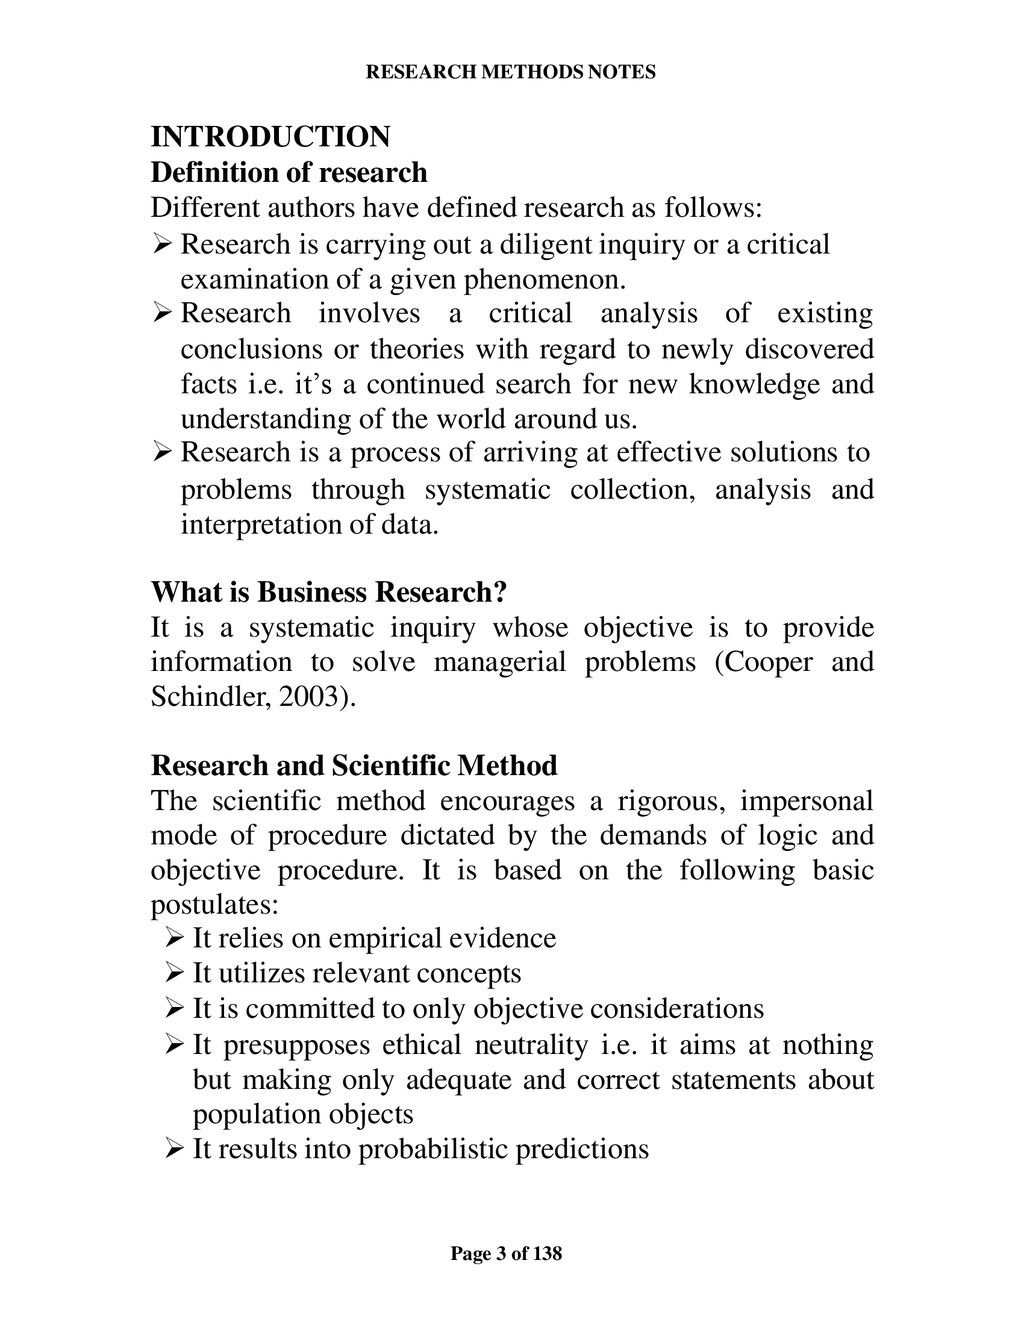 definition of research methodology by different authors